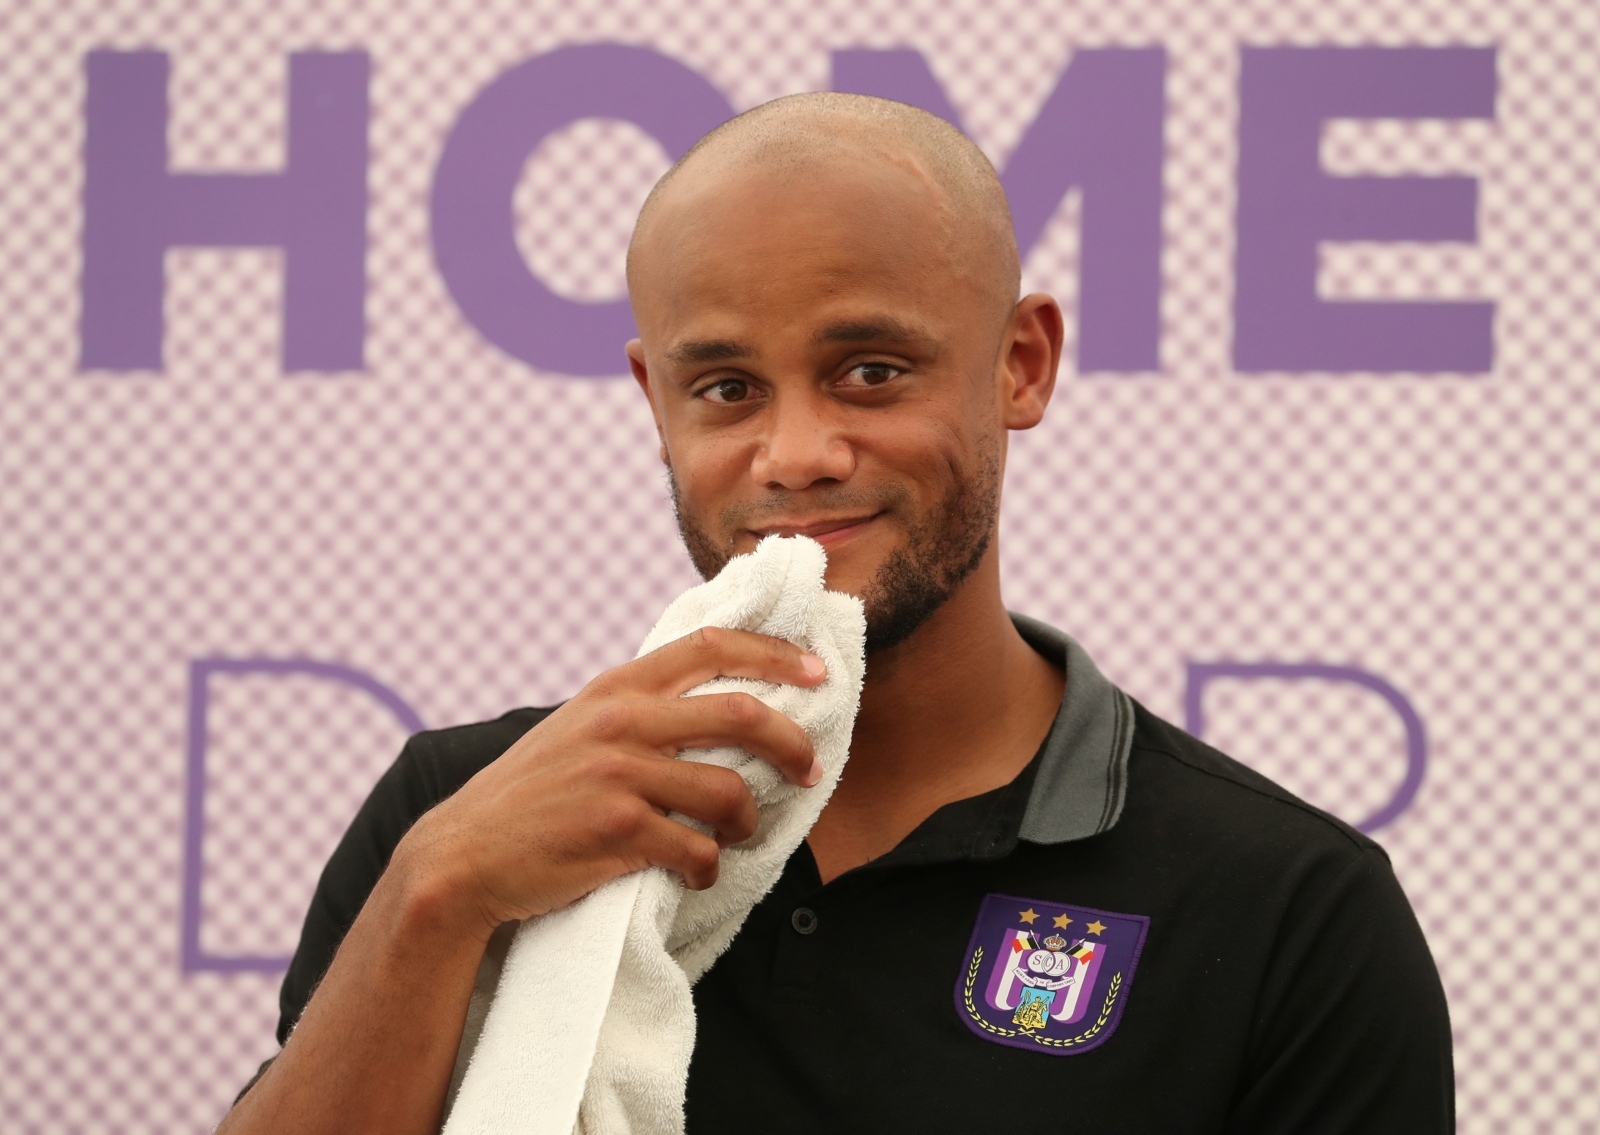 Anderlecht - Vincent Kompany Press Conference Soccer Football - Anderlecht - Vincent Kompany Press Conference - Neerpede Training Center, Brussels, Belgium - June 25, 2019  Anderlecht Player-Coach Vincent Kompany during the press conference  REUTERS/Yves Herman YVES HERMAN